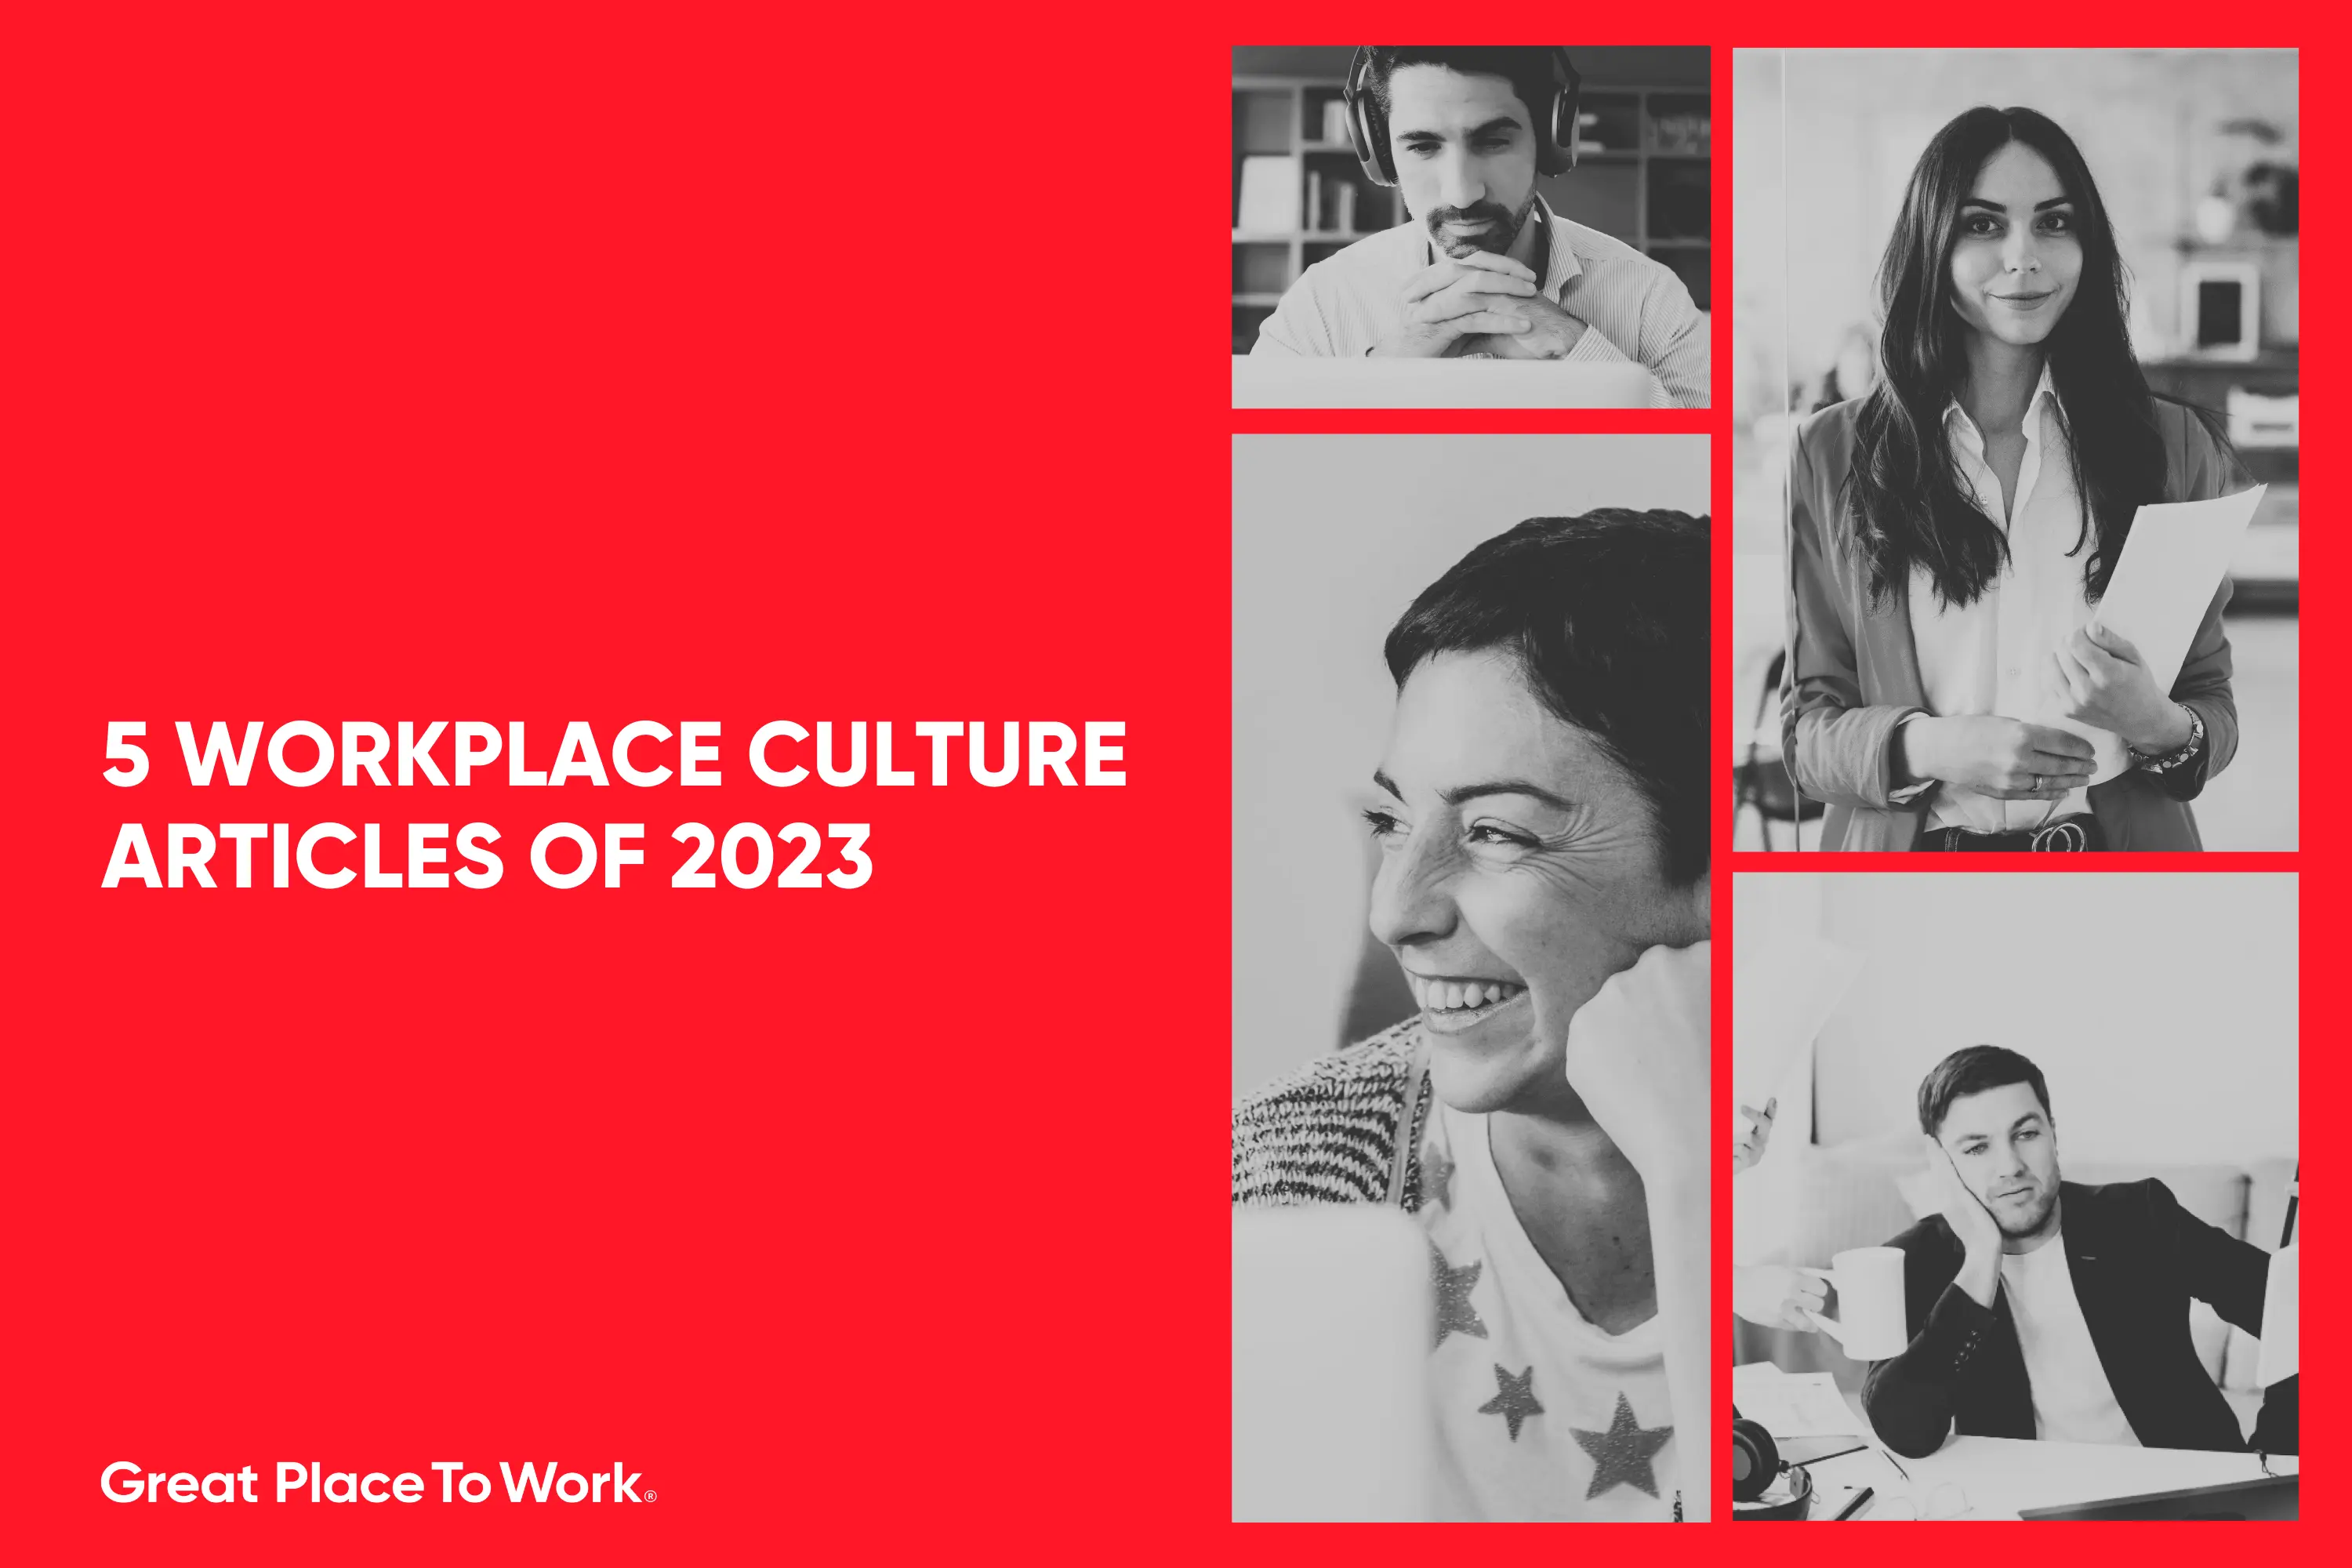  5 Most Popular Workplace Culture Articles of 2023